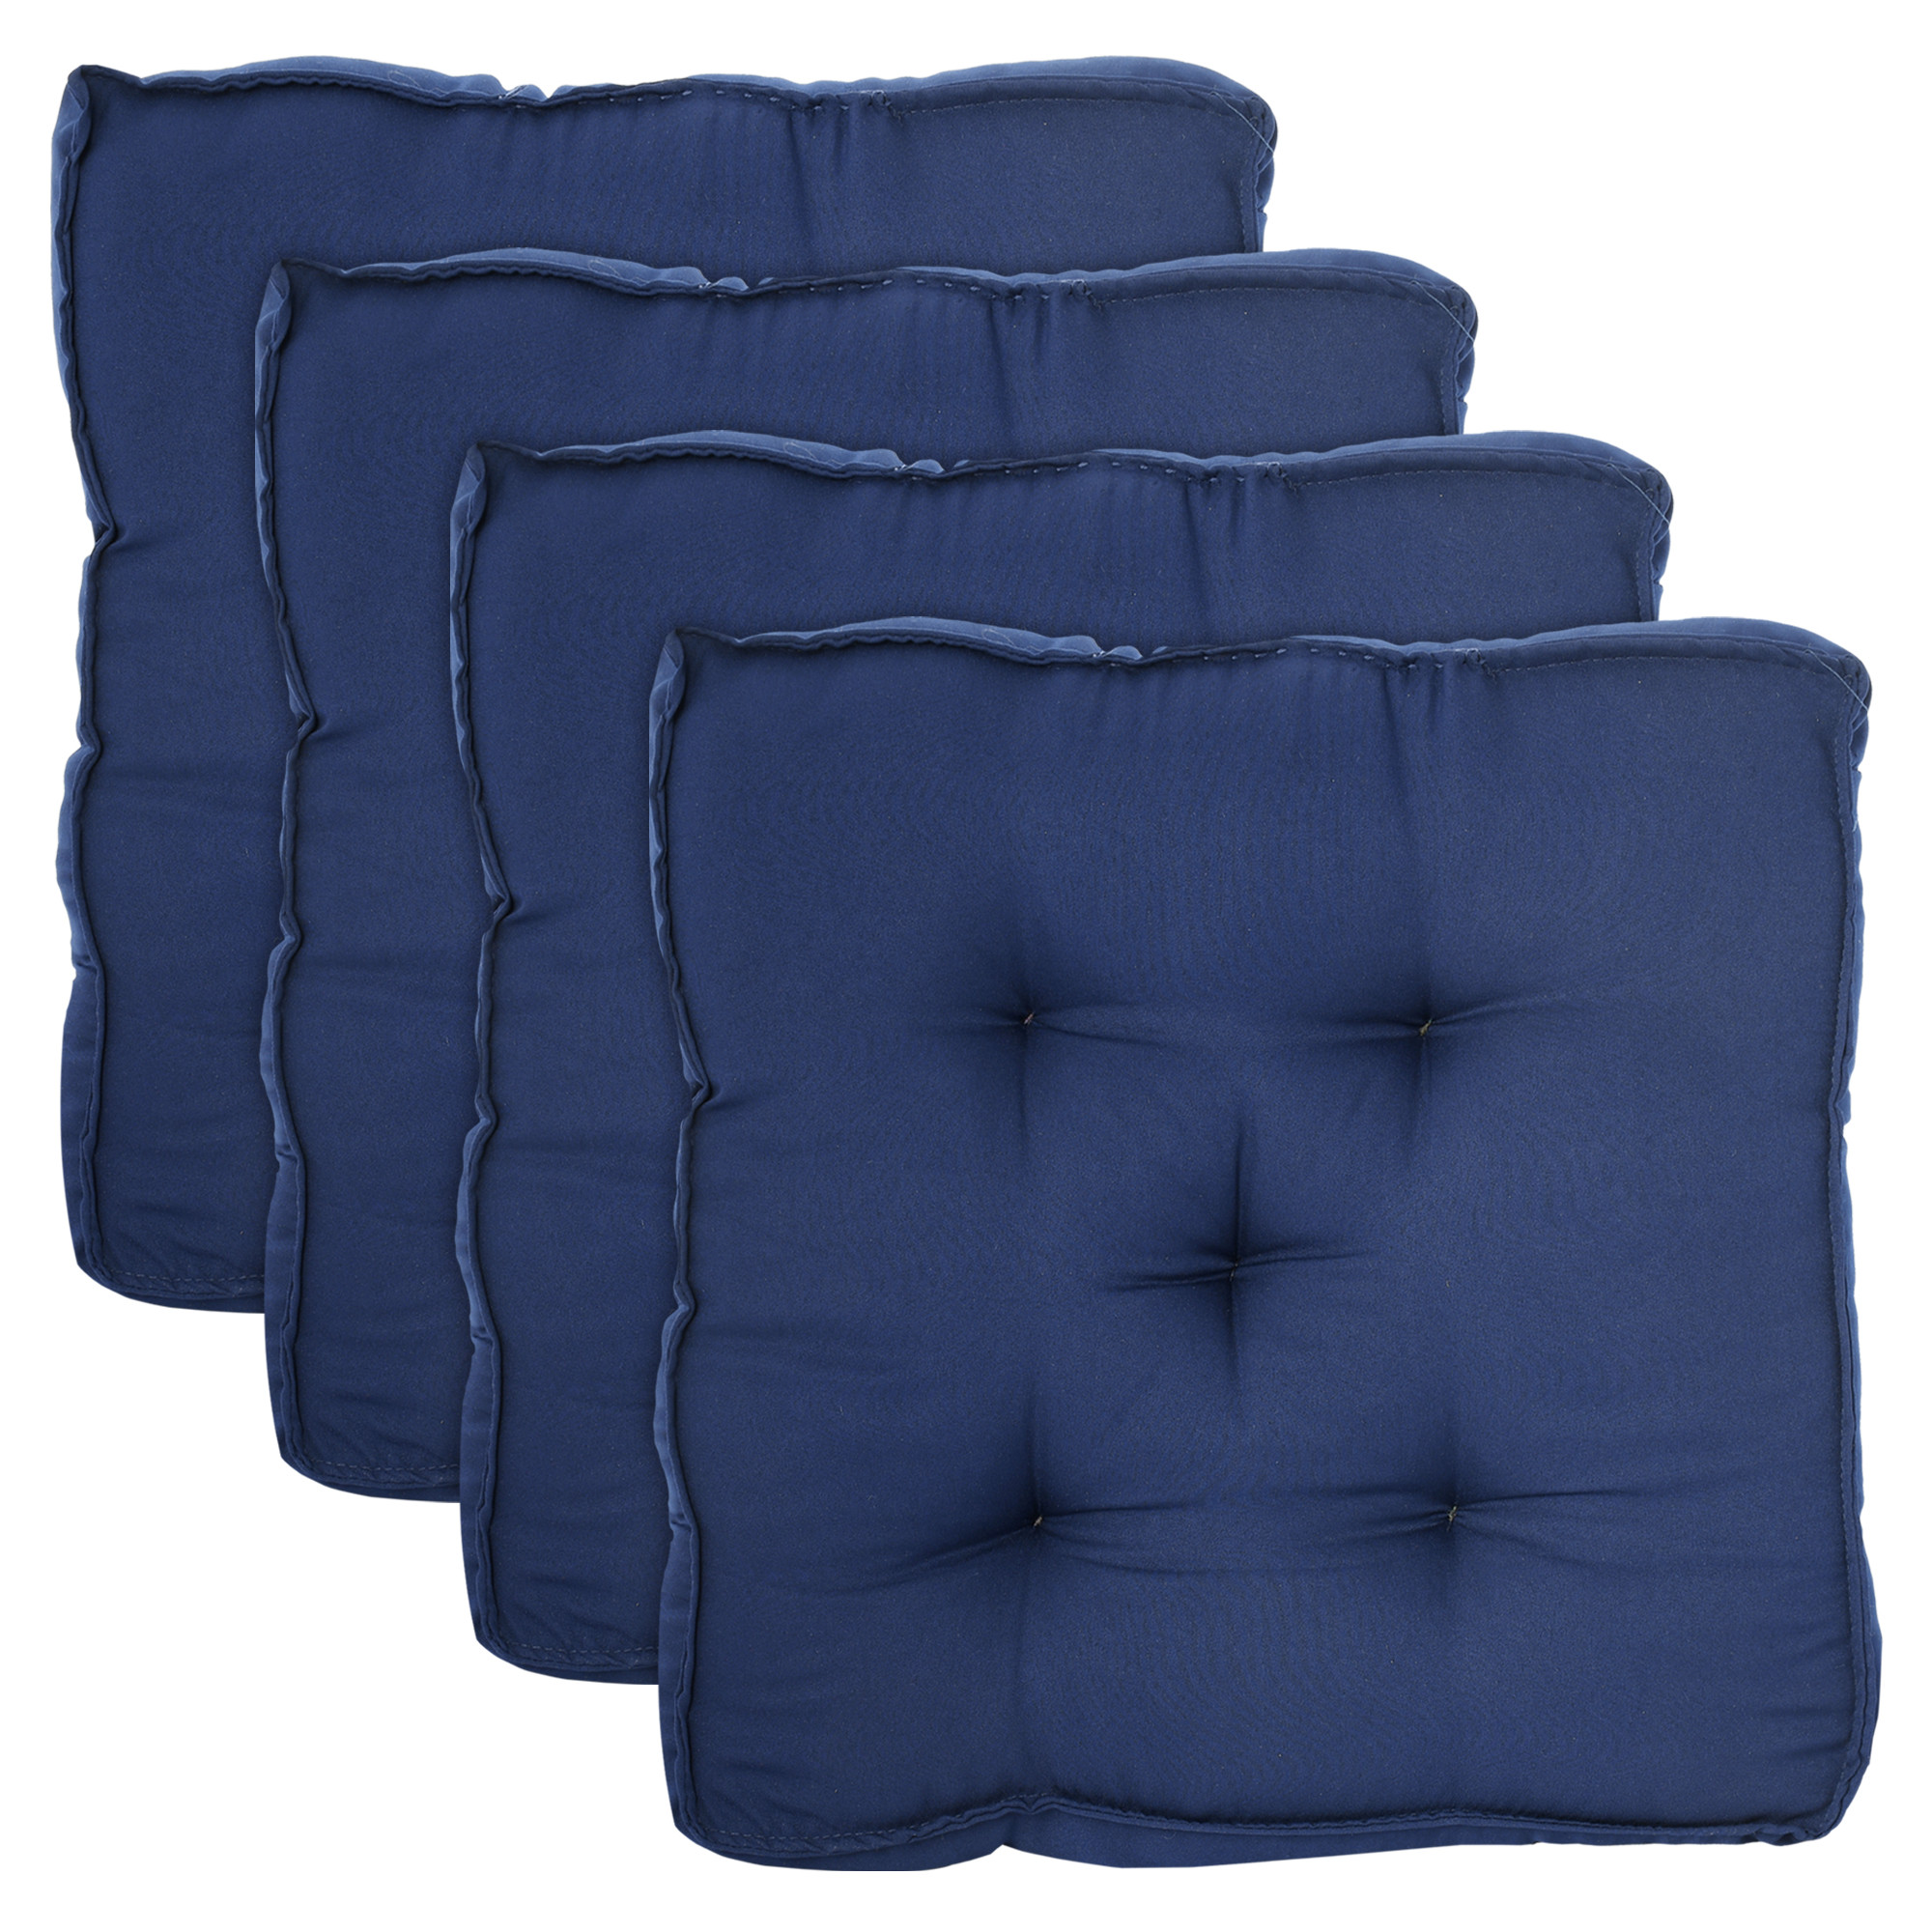 Kuber Industries Microfiber Square Chair Pad Seat Cushion For Car Pad, Office Chair, Indoor/Outdoor, Dining Living Room, Kitchen, 18*18 Inch (Navy Blue)